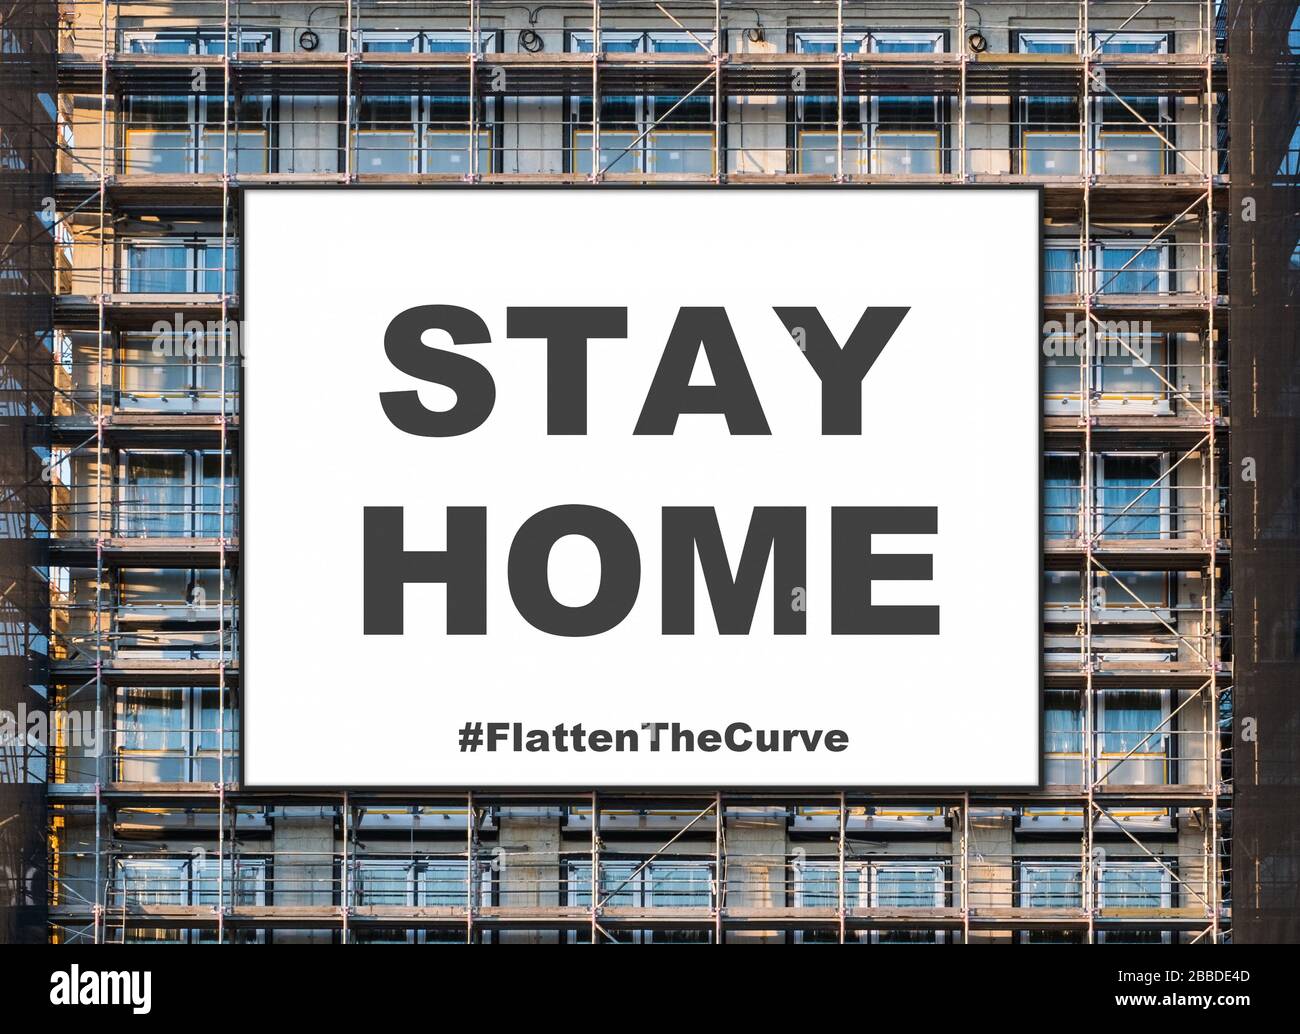 stay at home flatten the curve sign - Corona Virus Stock Photo